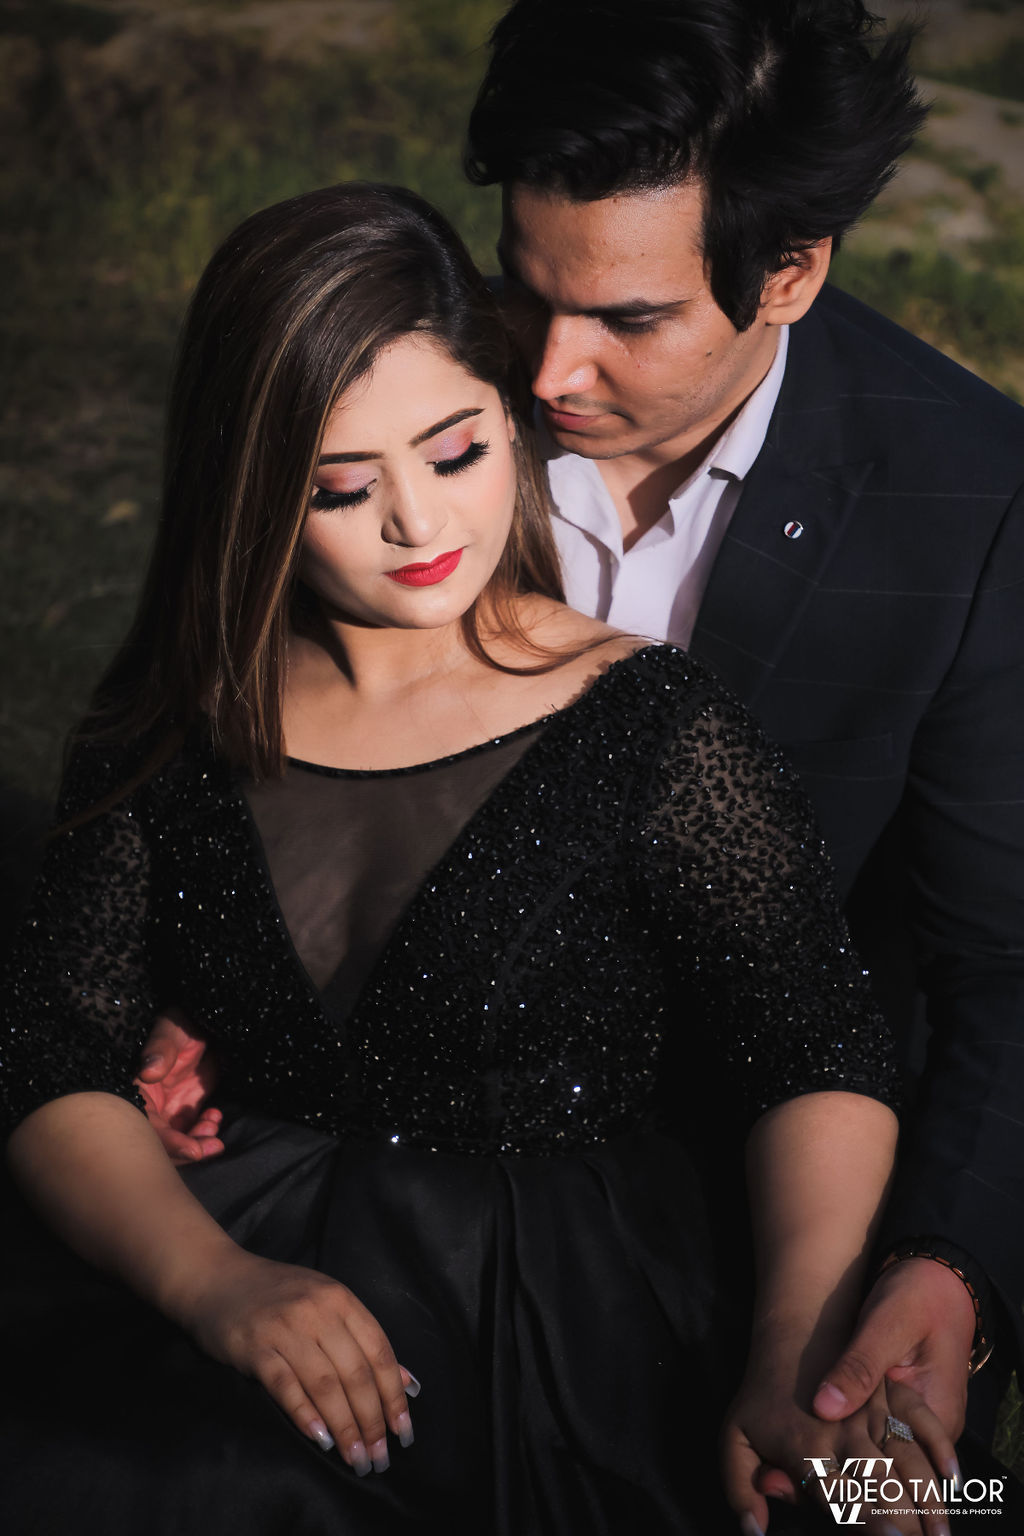 Couples Matching Outfit, Pre Wedding Photoshoot Outfit, Black